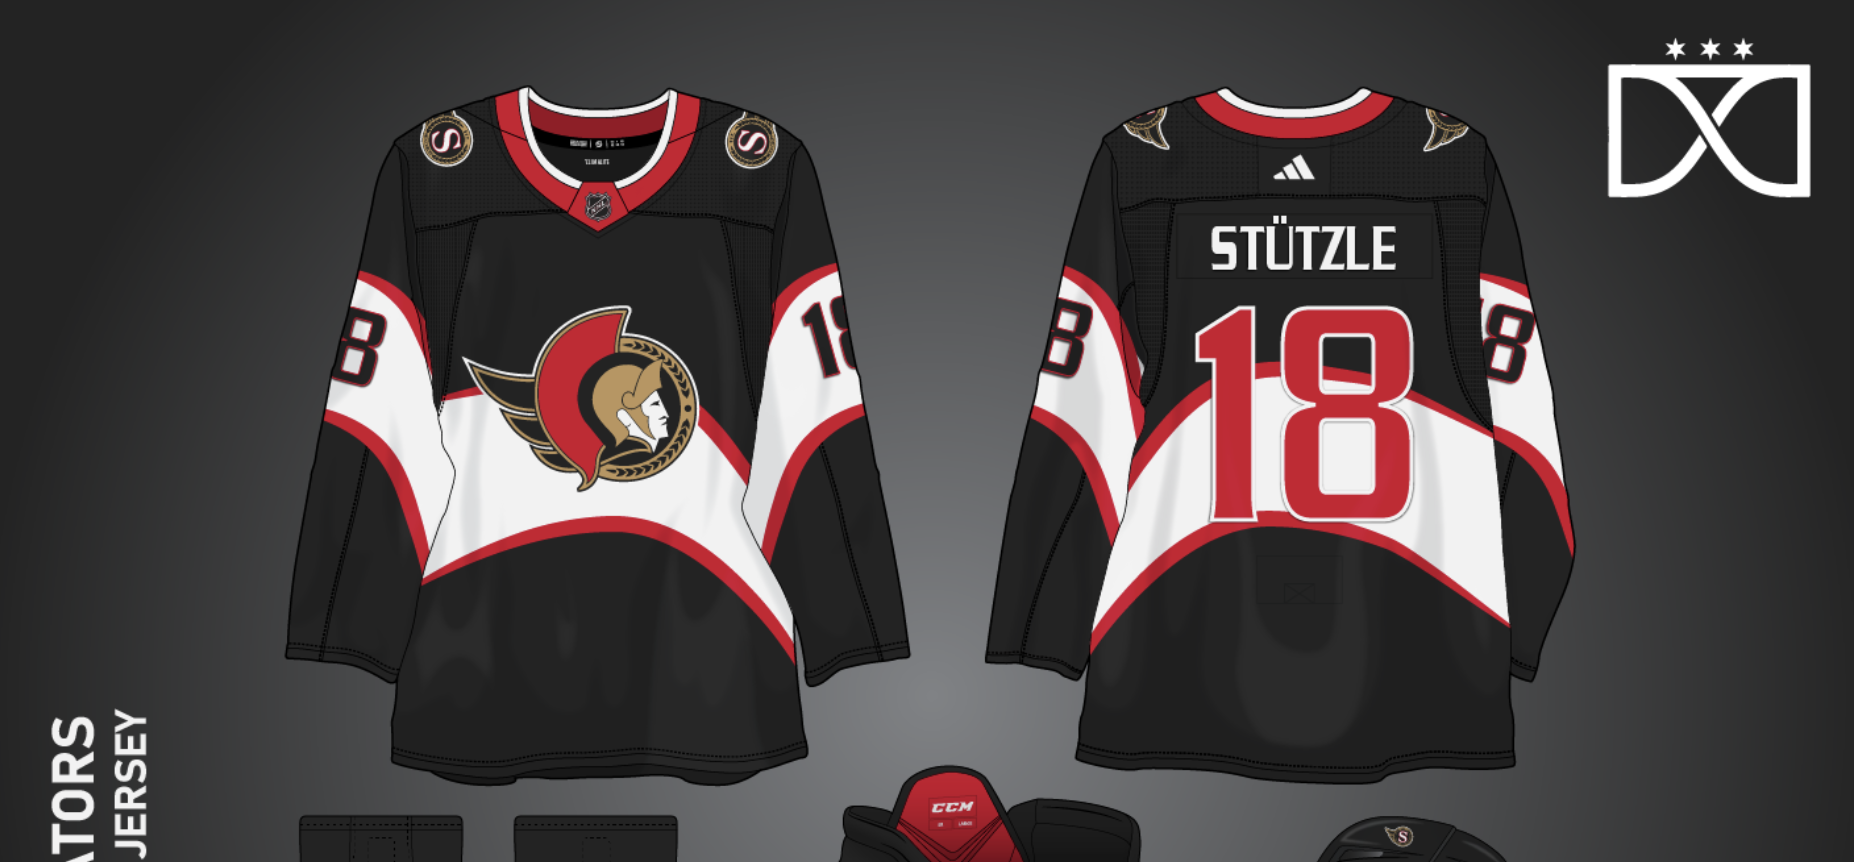 NHL Jersey Concepts 